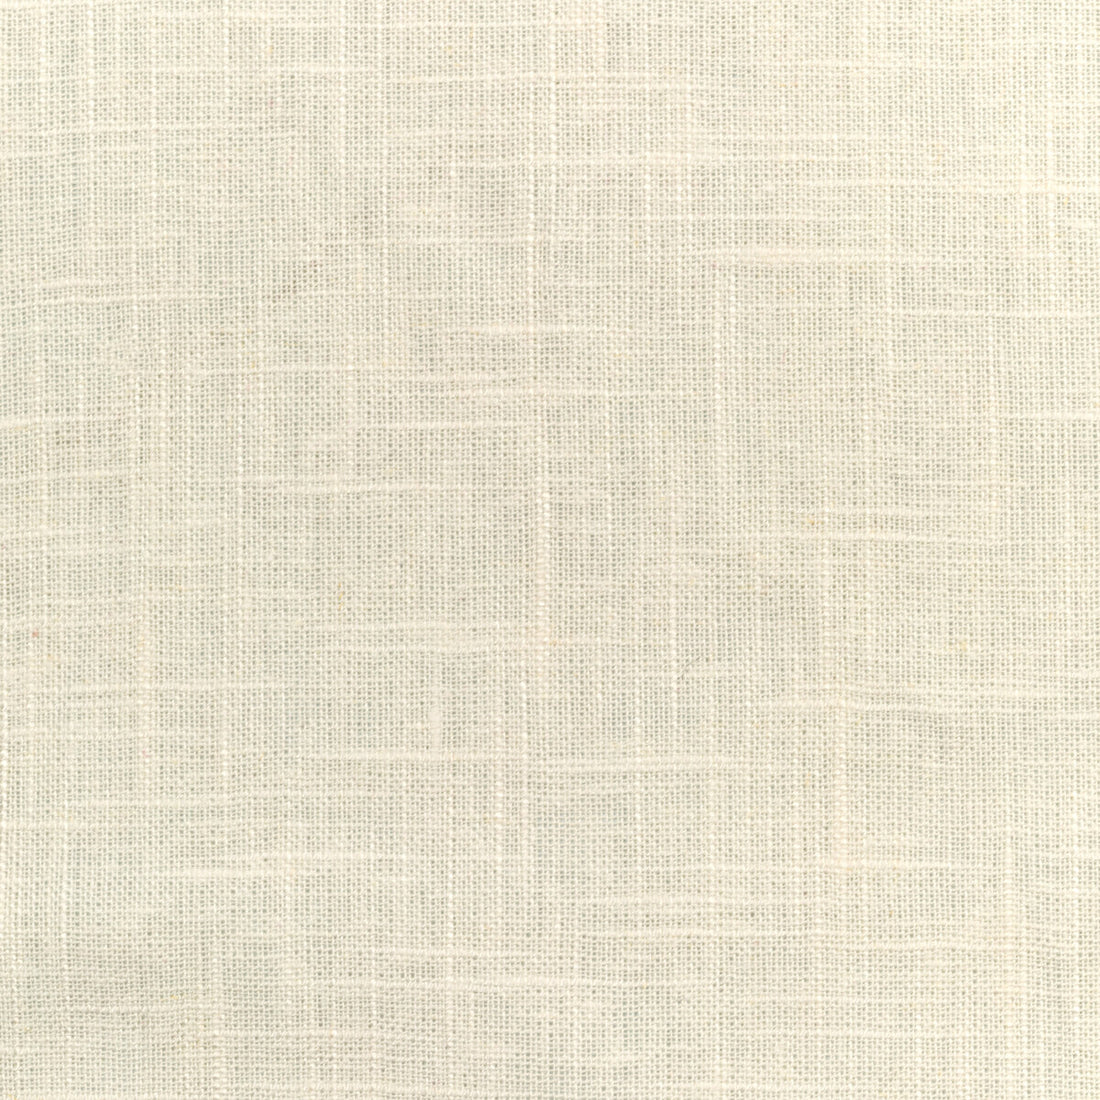 Barnegat fabric in creamy color - pattern 24573.1.0 - by Kravet Basics in the Perfect Plains collection